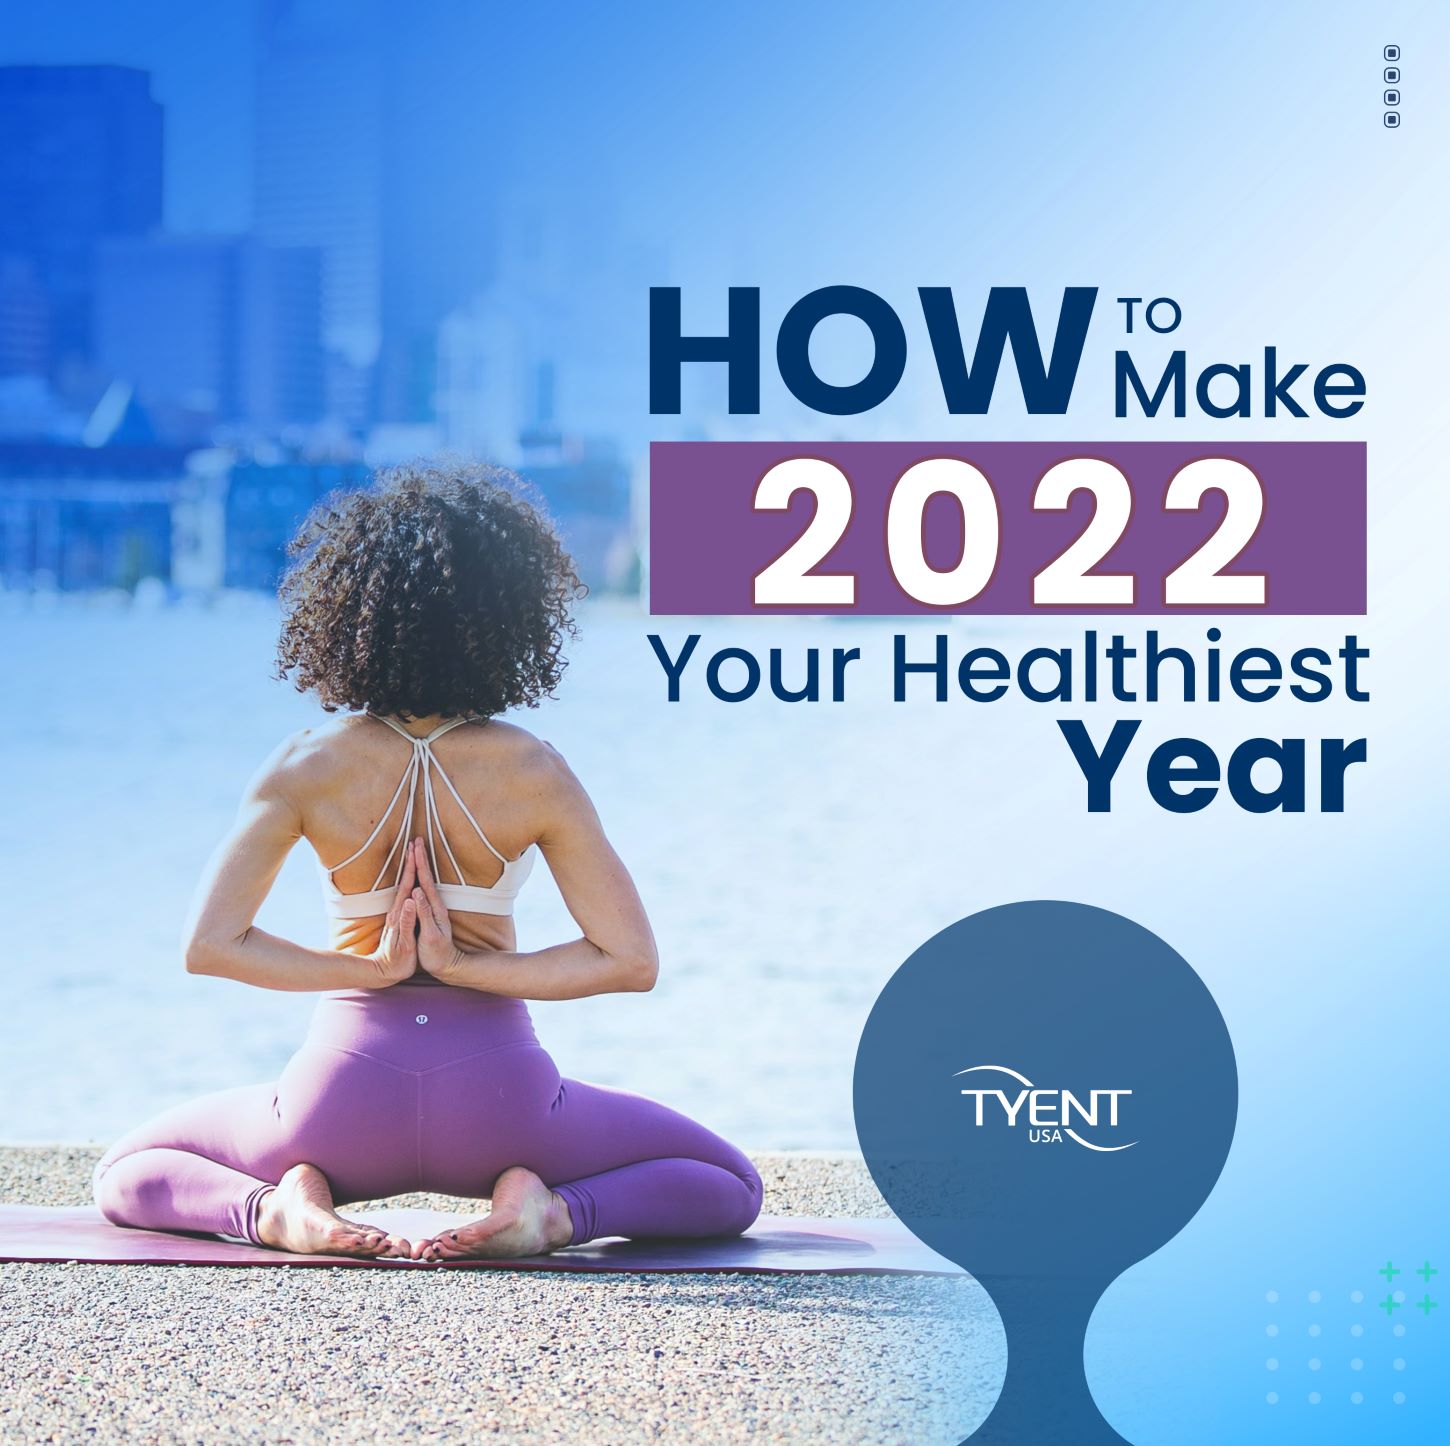 How To Make 2022 Your Healthiest Year